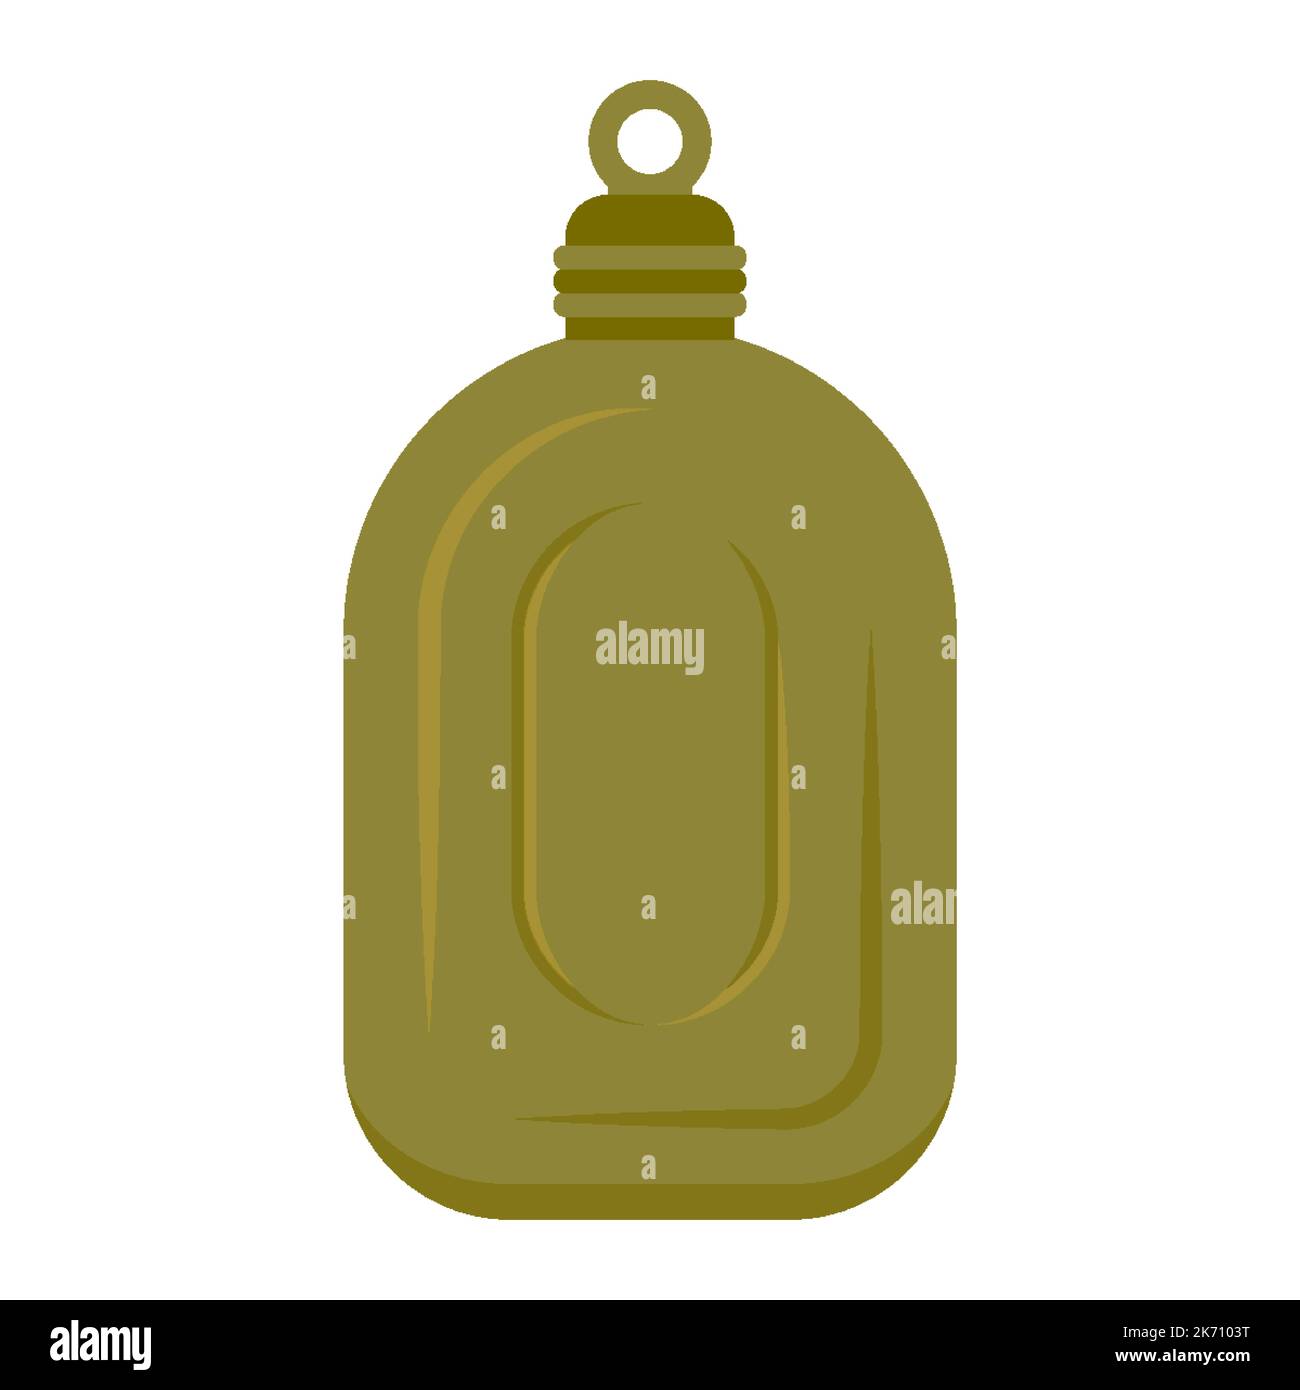 Military flask metal water bottle army green flat. Water storage capacity equipment travel bottle soldier ammunition travel survival outfit desert metal khaki camping quench thirst hunter isolated Stock Vector